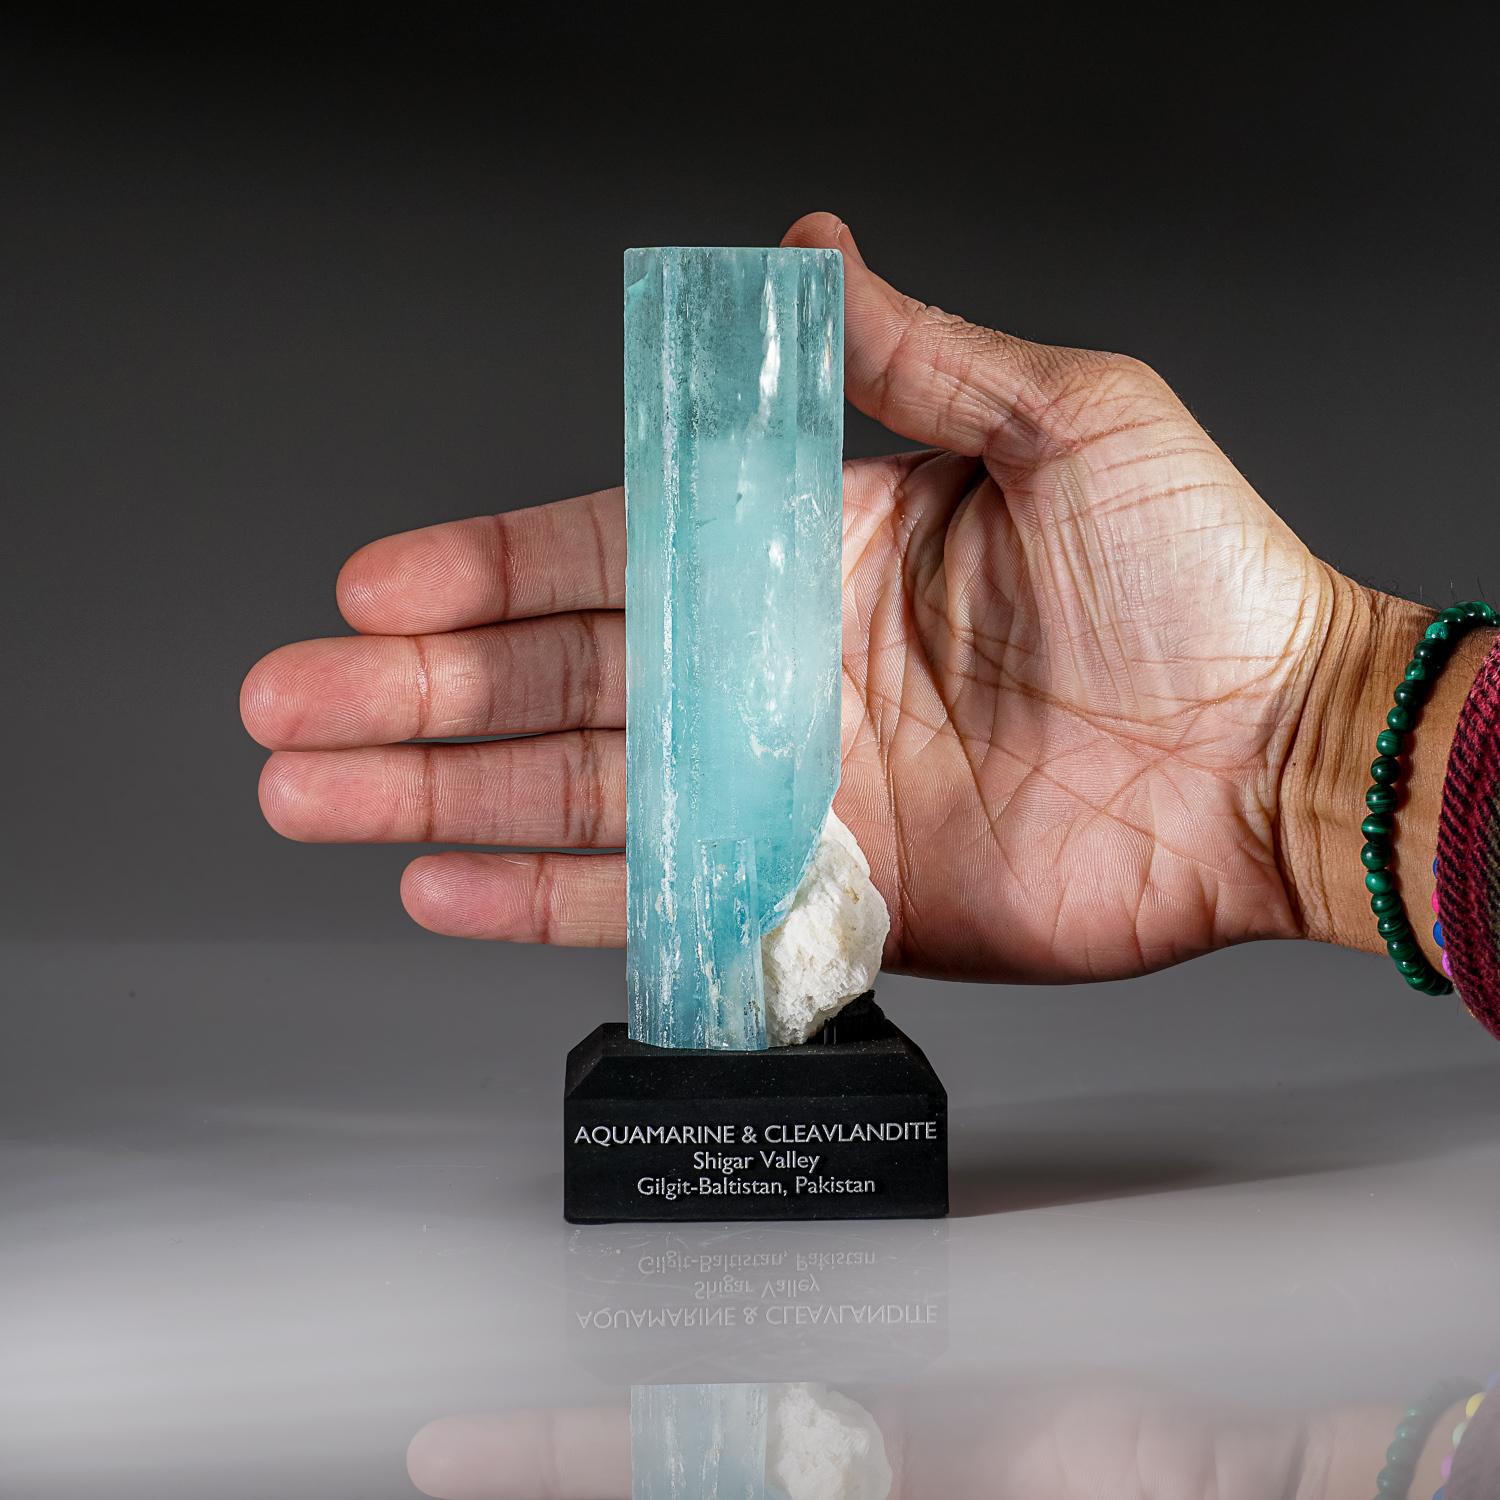 From Shigar Valley, Shigar District, Gilgit-Baltistan, Pakistan

Lustrous translucent to transparent gemmy crystals of aquamarine beryl with Cleavlandite. The aquamarine crystal is highly transparent with glassy crystal faces. Internally areas of